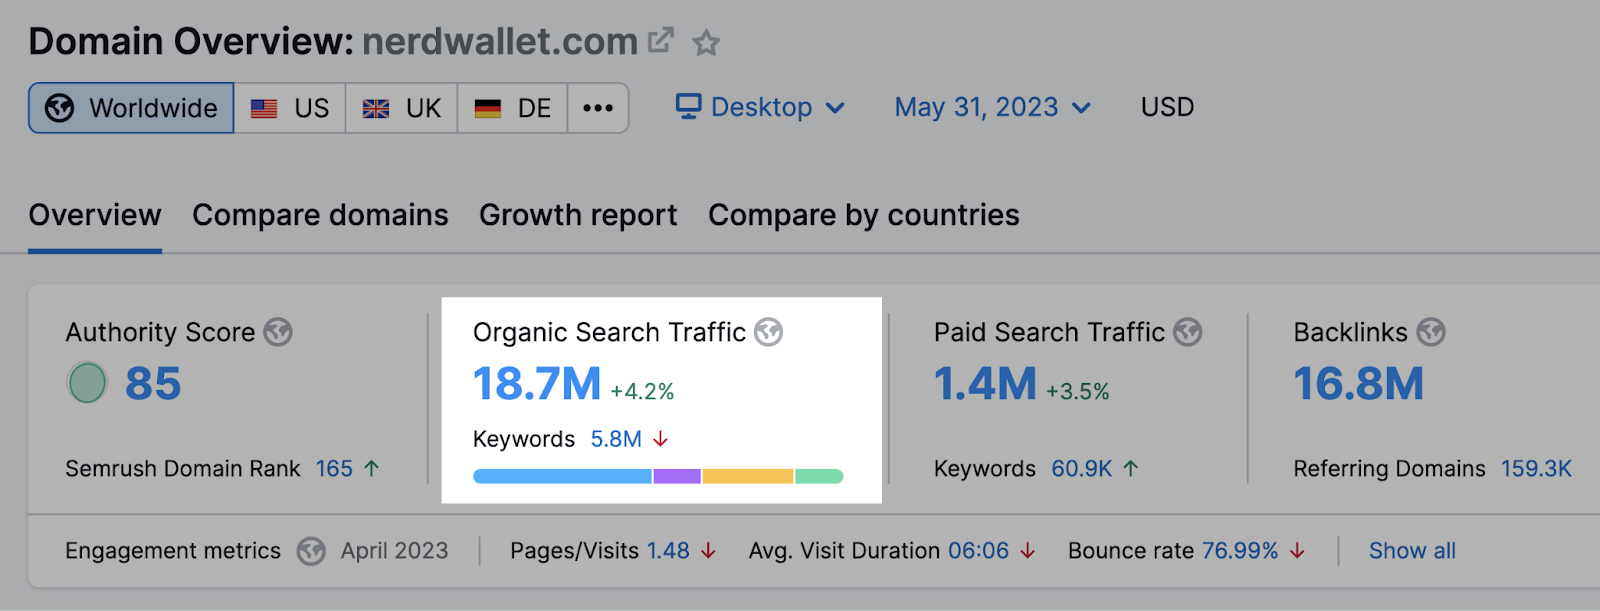 Organic search traffic metric in Semrush’s Domain Overview tool